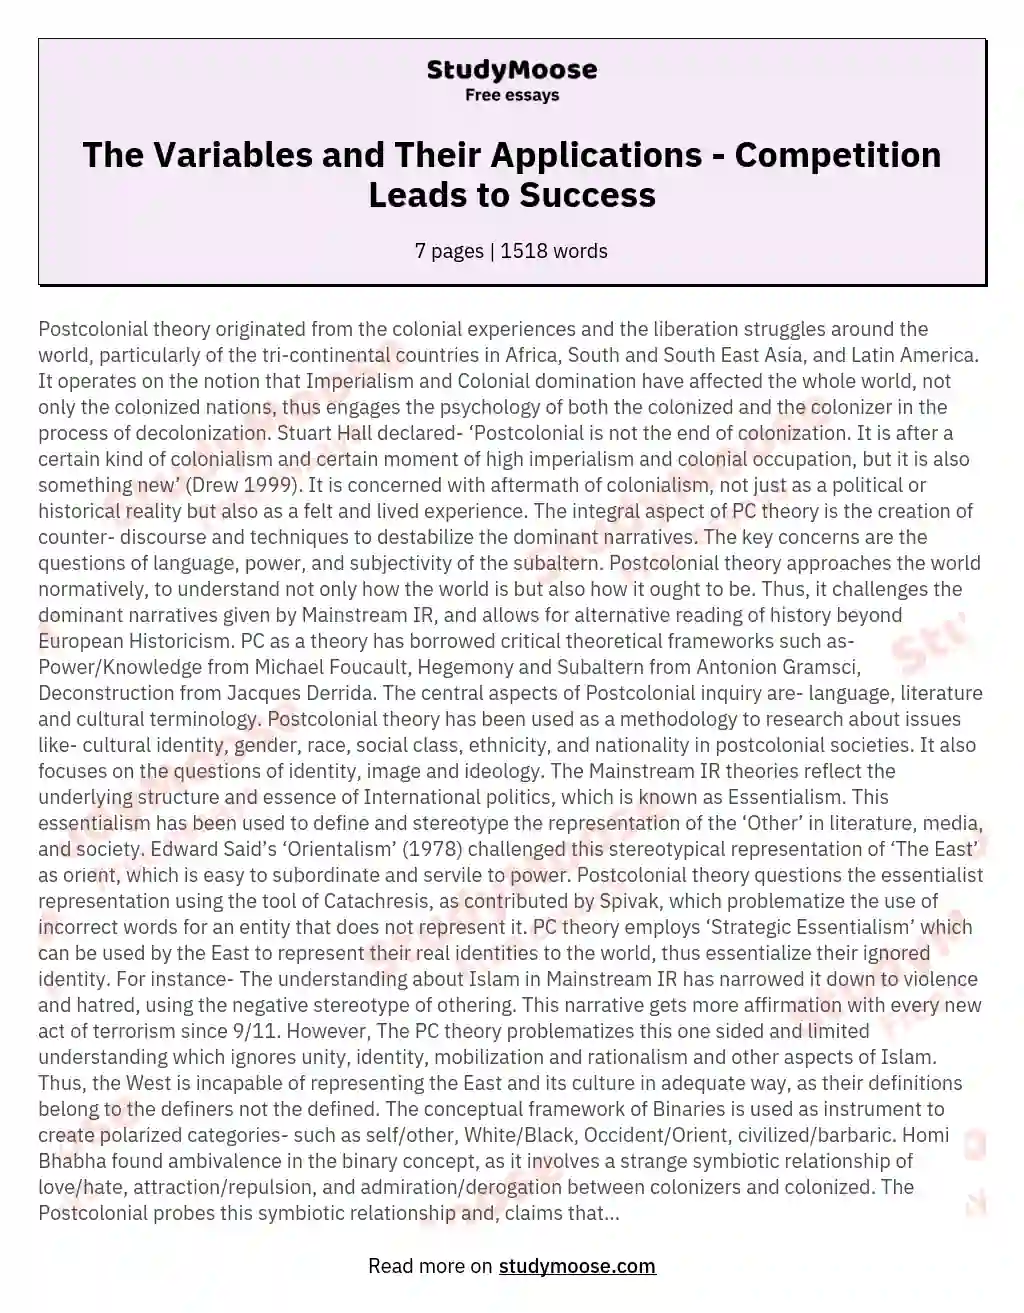 essay about competition leads to success